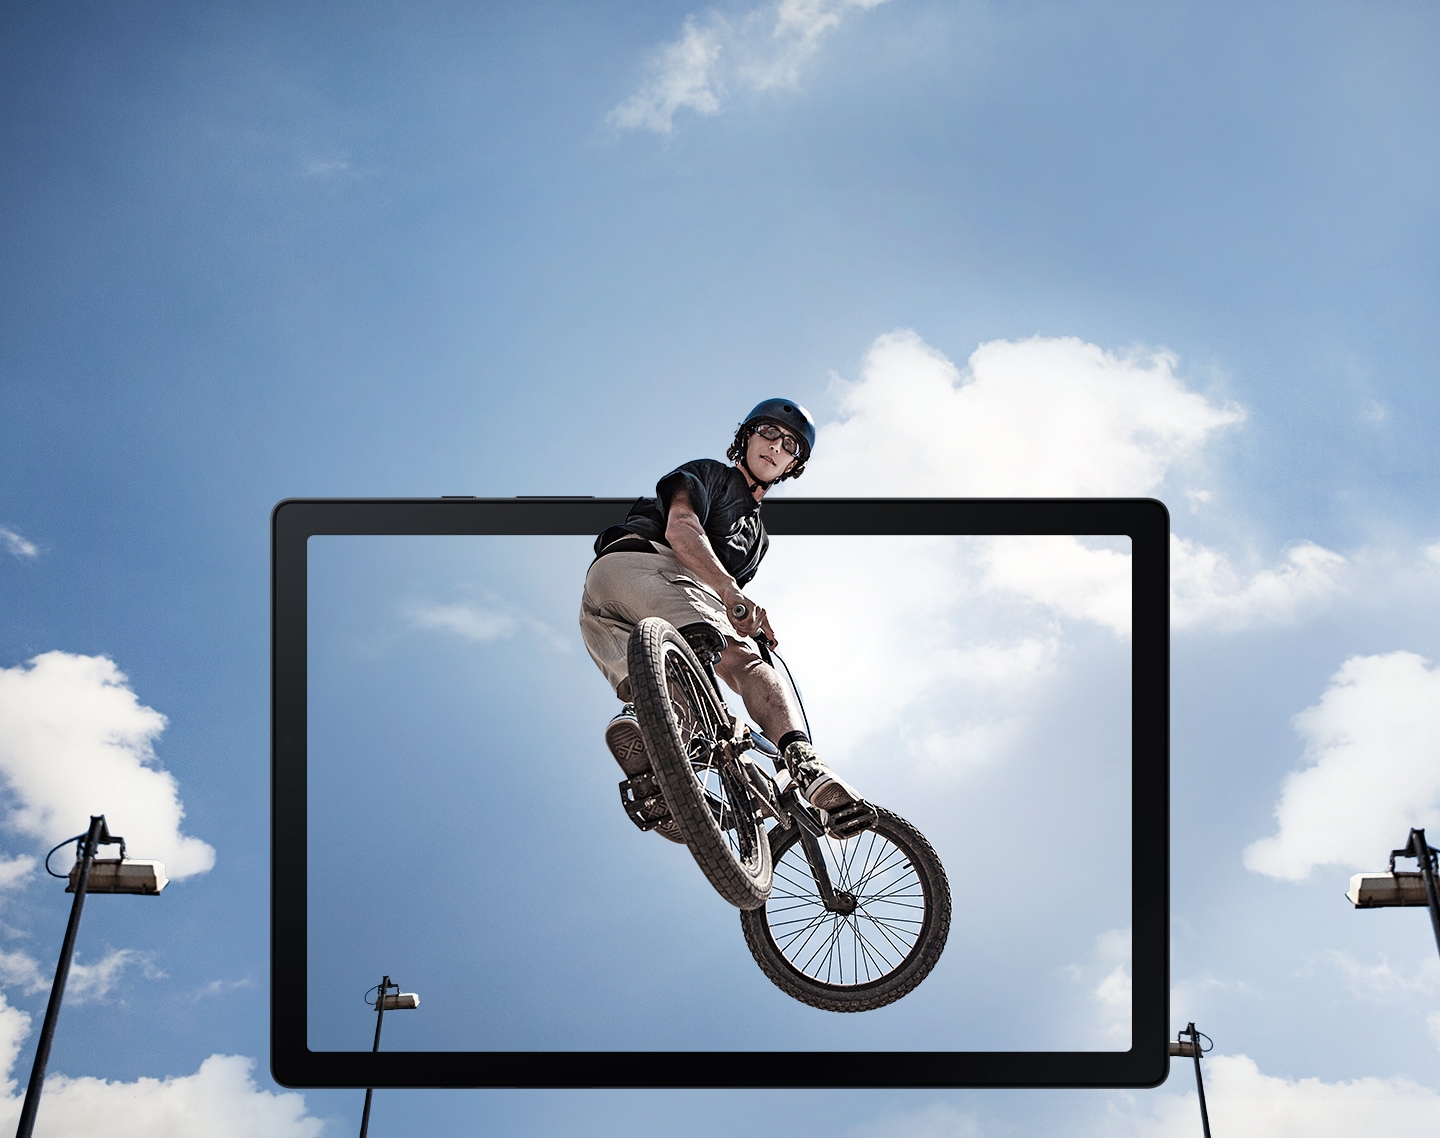 A man doing a jump on a BMX bicycle in the air is shown popping out of a tablet screen.